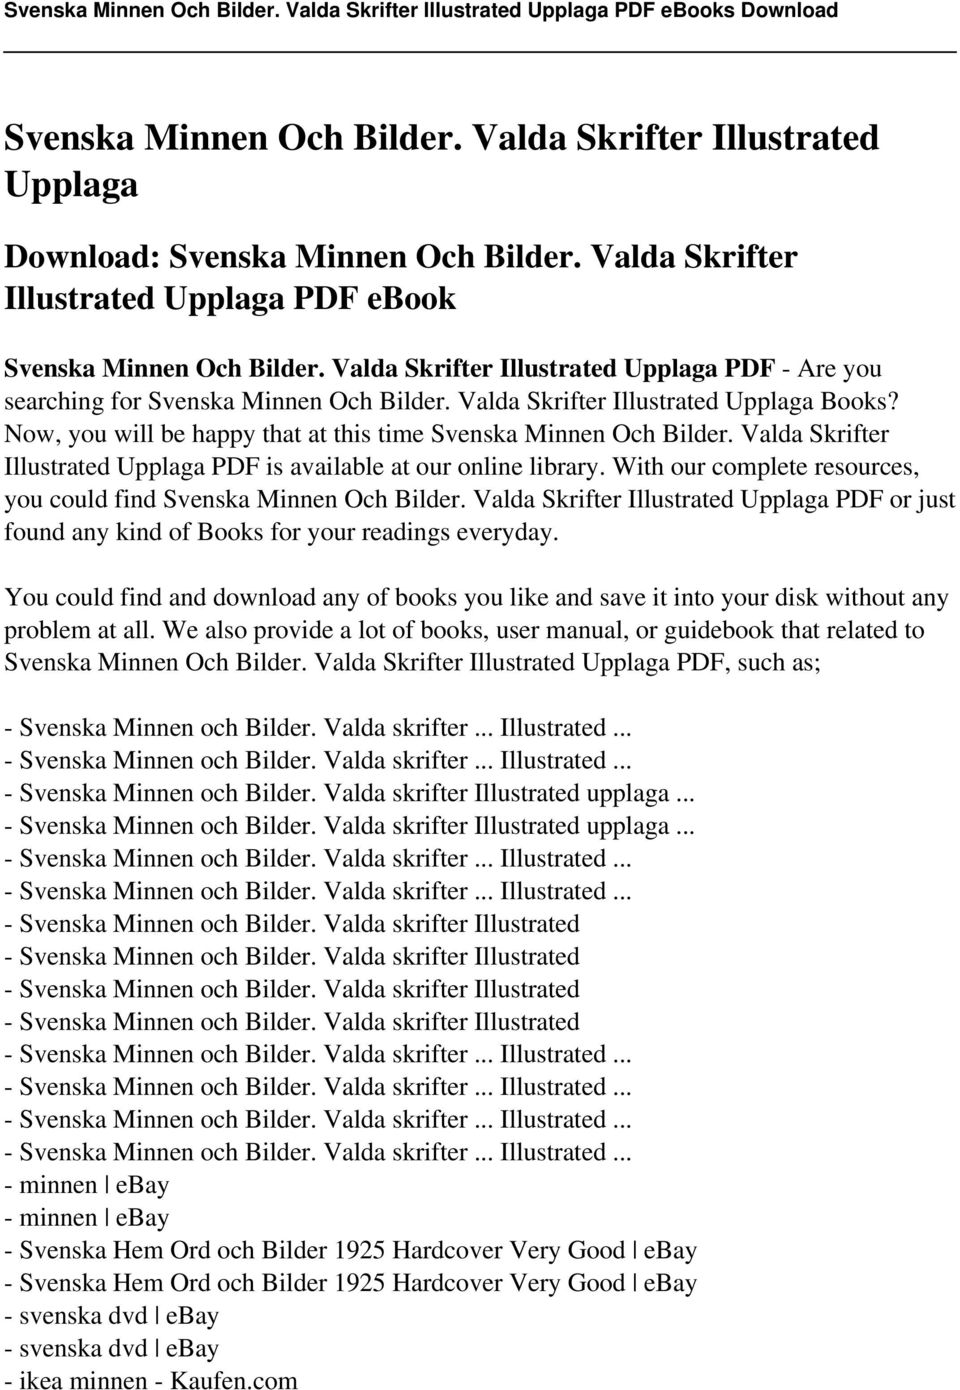 Valda Skrifter Illustrated Upplaga PDF is available at our online library. With our complete resources, you could find Svenska Minnen Och Bilder.